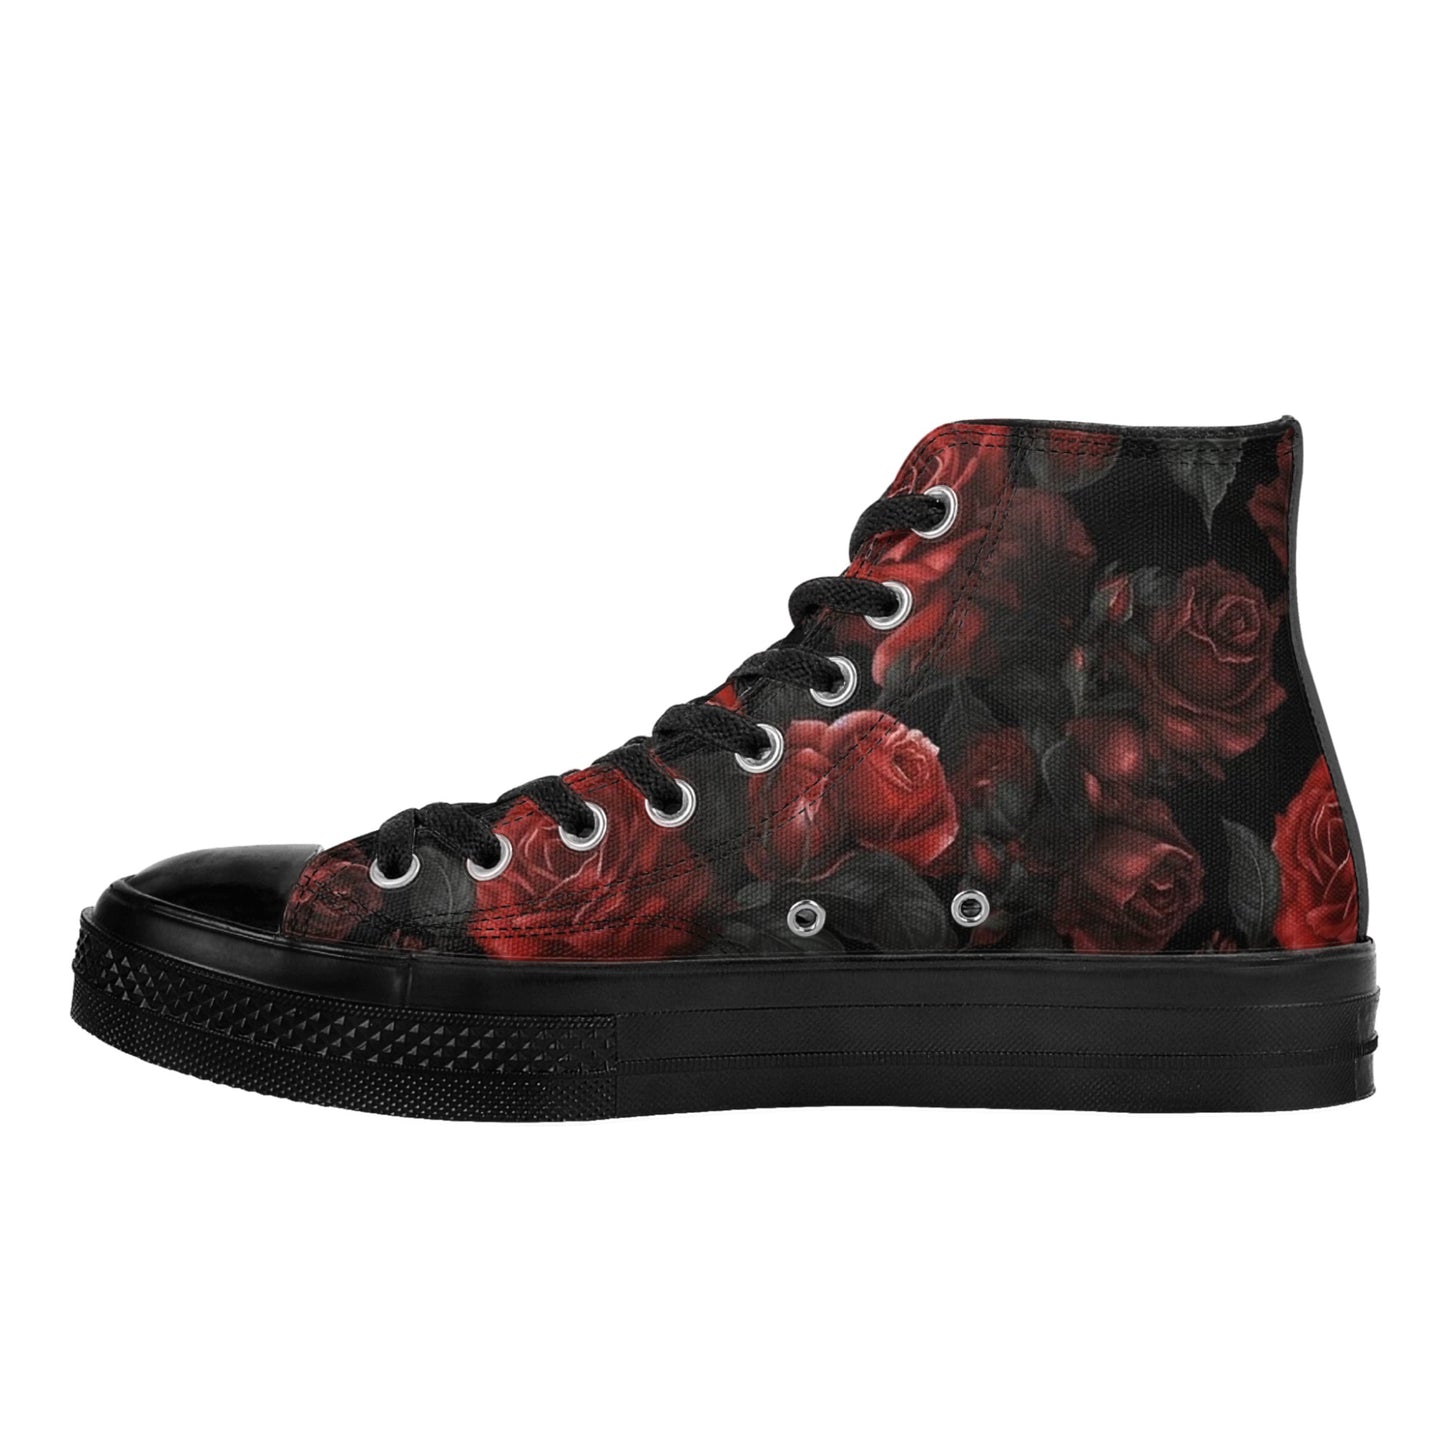 Red and Black Roses Women High Top Shoes, Gothic Flowers Floral Lace Up Sneakers Footwear Canvas Streetwear Ladies Girls Trainers Designer